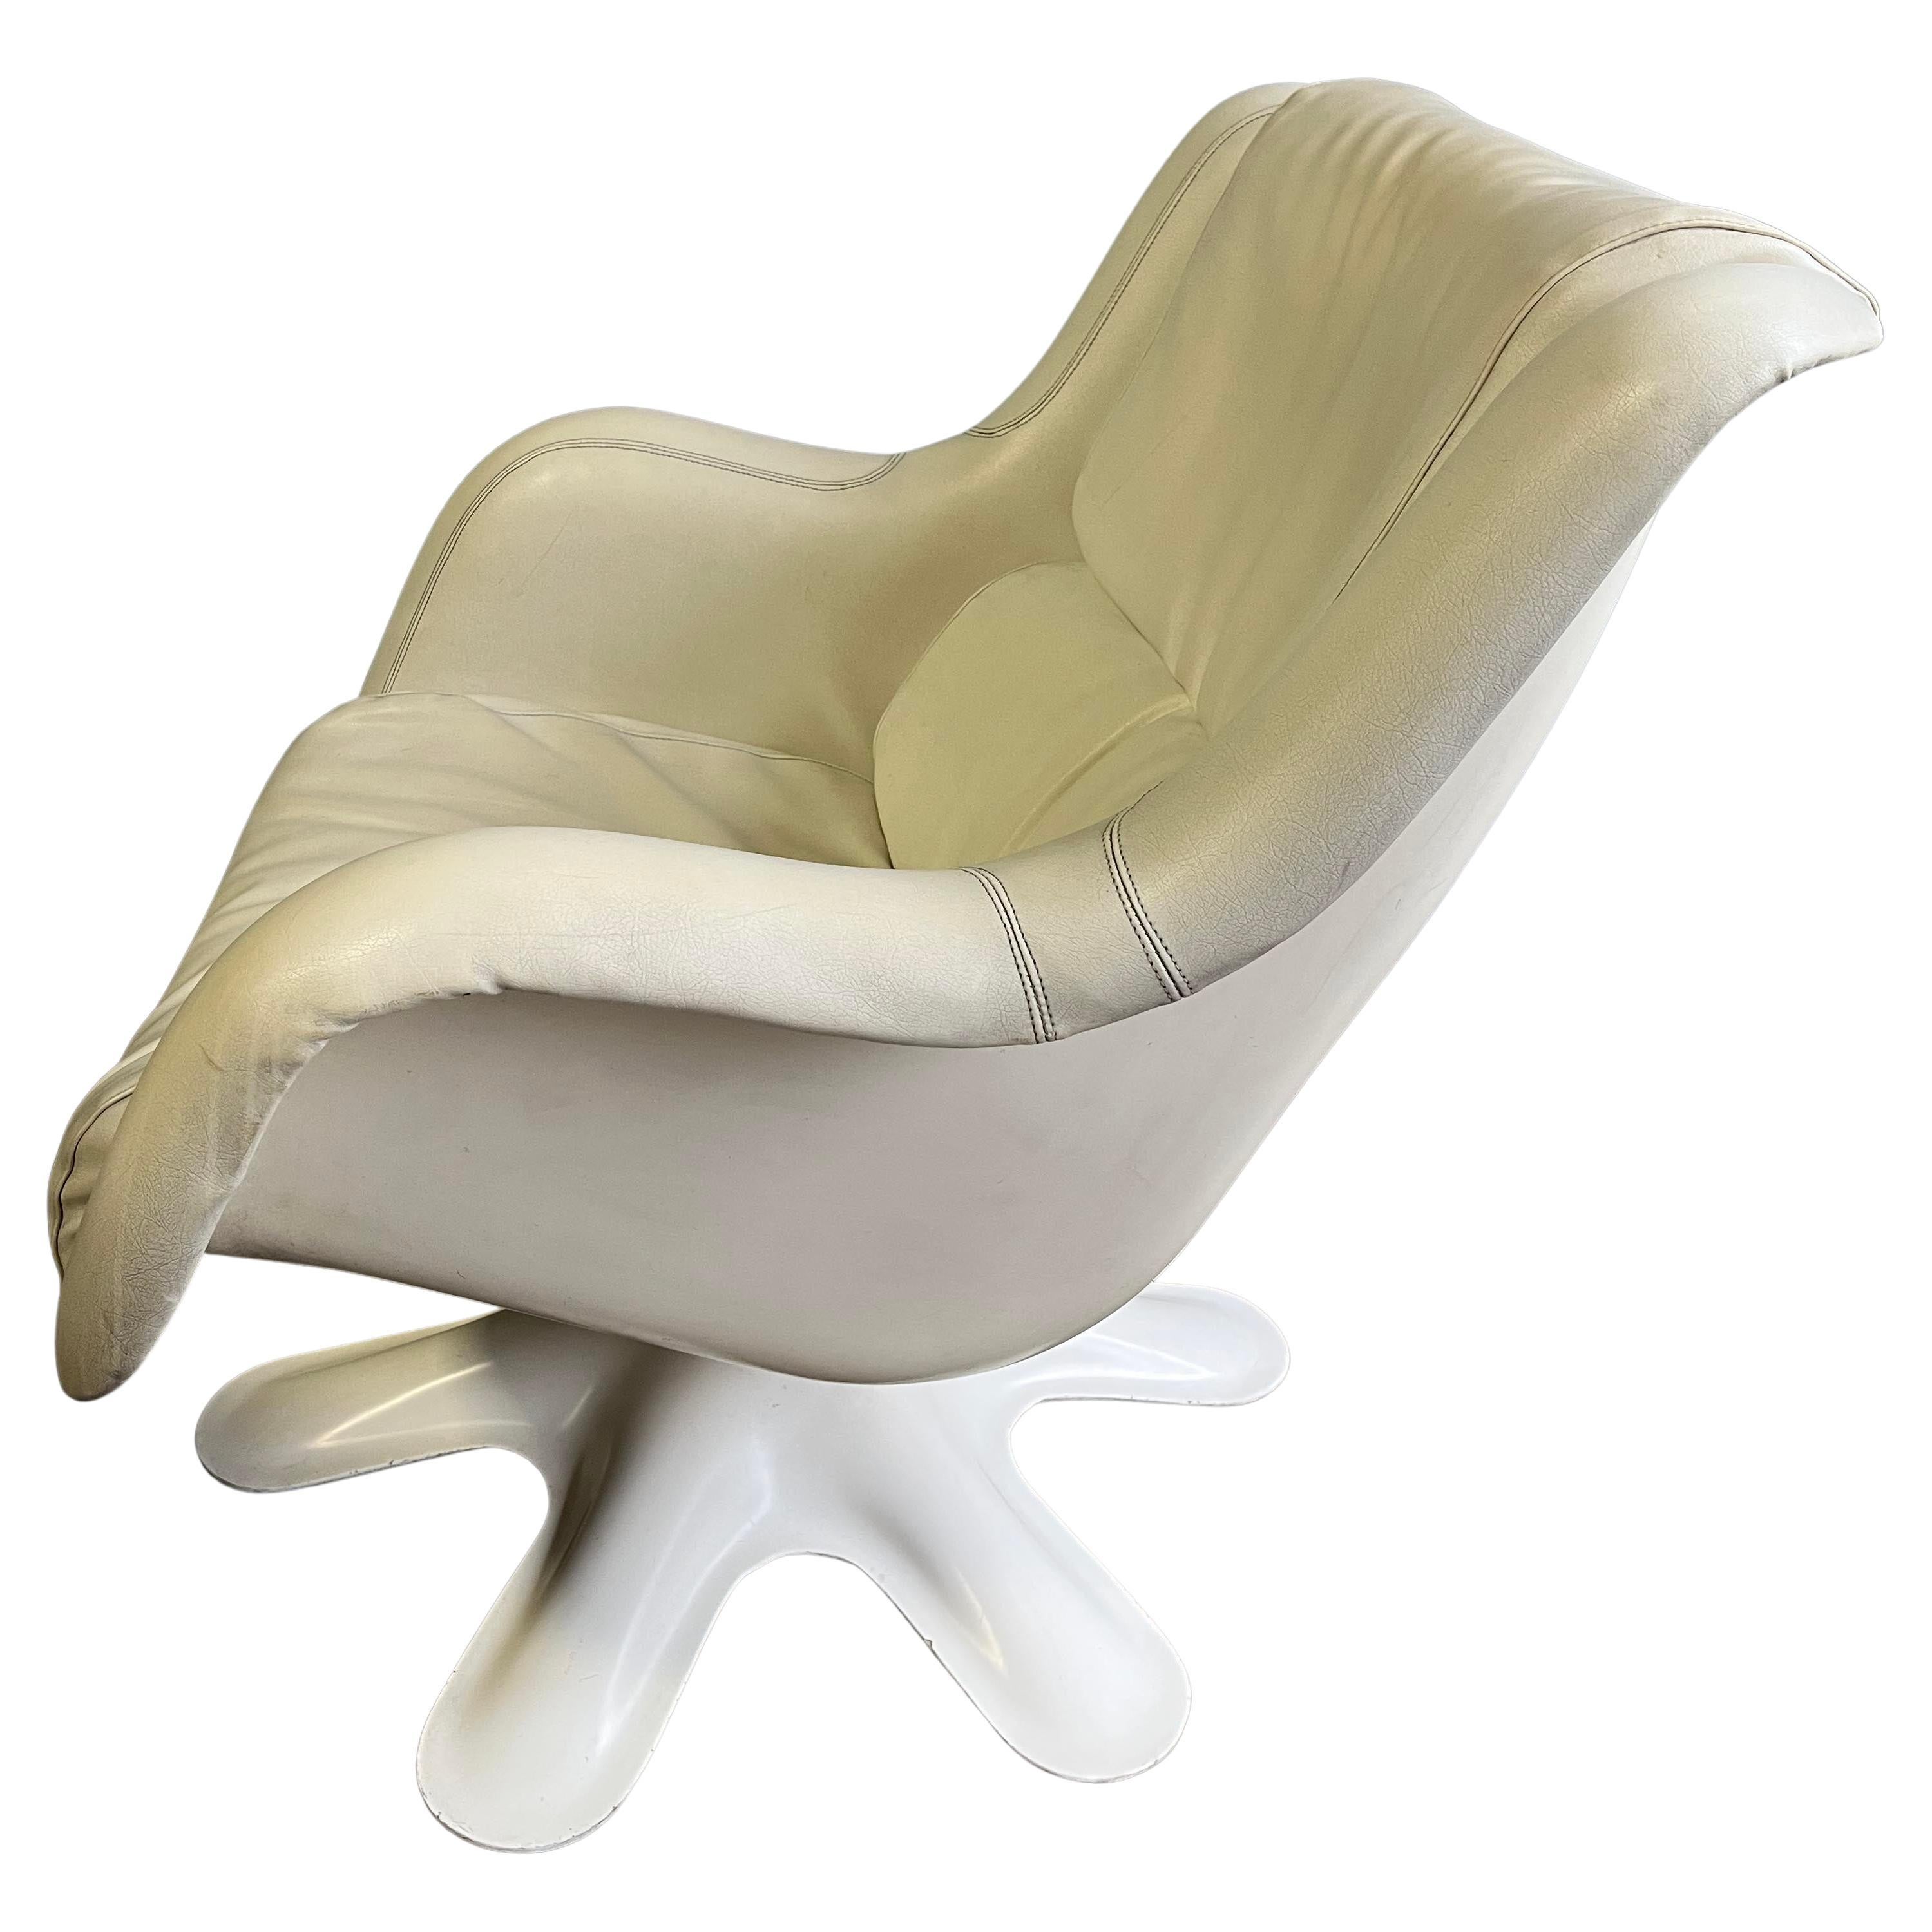 Lounge Chair, designed by Yrjö Kukkapuro. Finnland, Haimi, 1964. 

Early Swivel and tilt armchair, produced in the late 1960s by Haimi. Organically shaped fibreglass shell, newly upholstered in deep white subtle leather. Extremely comfortable, shell